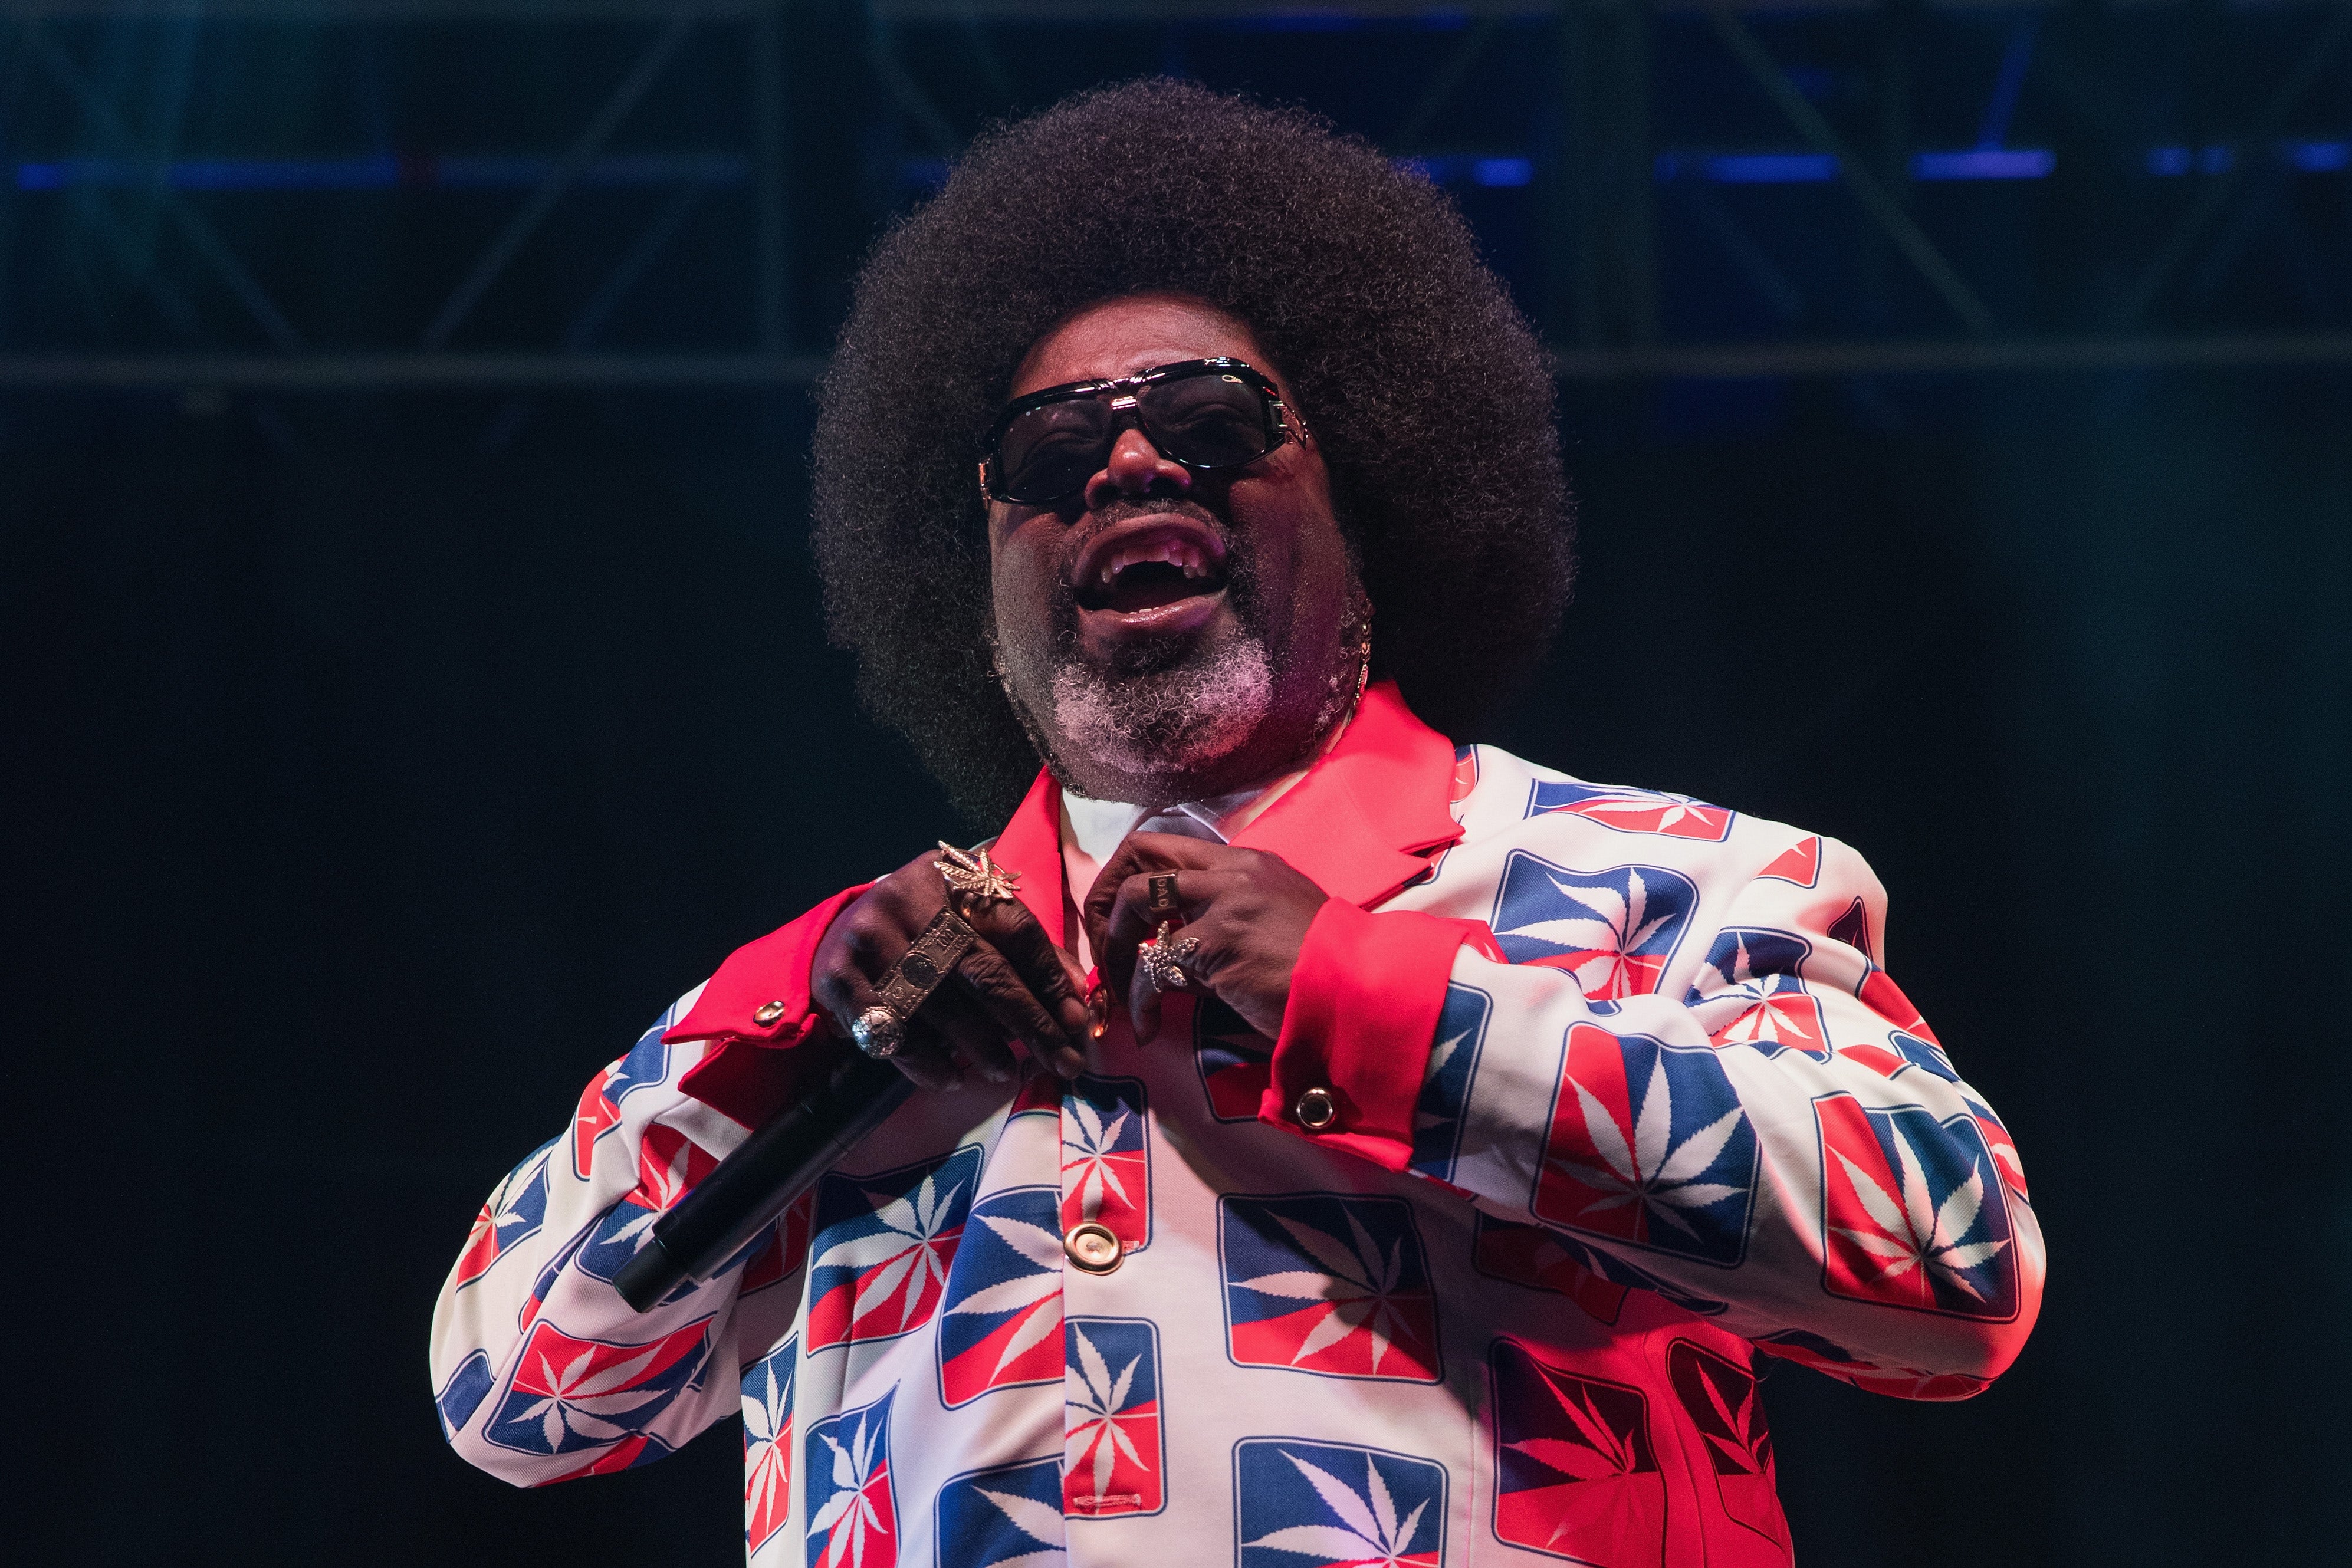 Rapper Afroman sued by law enforcement who raided his residence following he uses footage in songs films